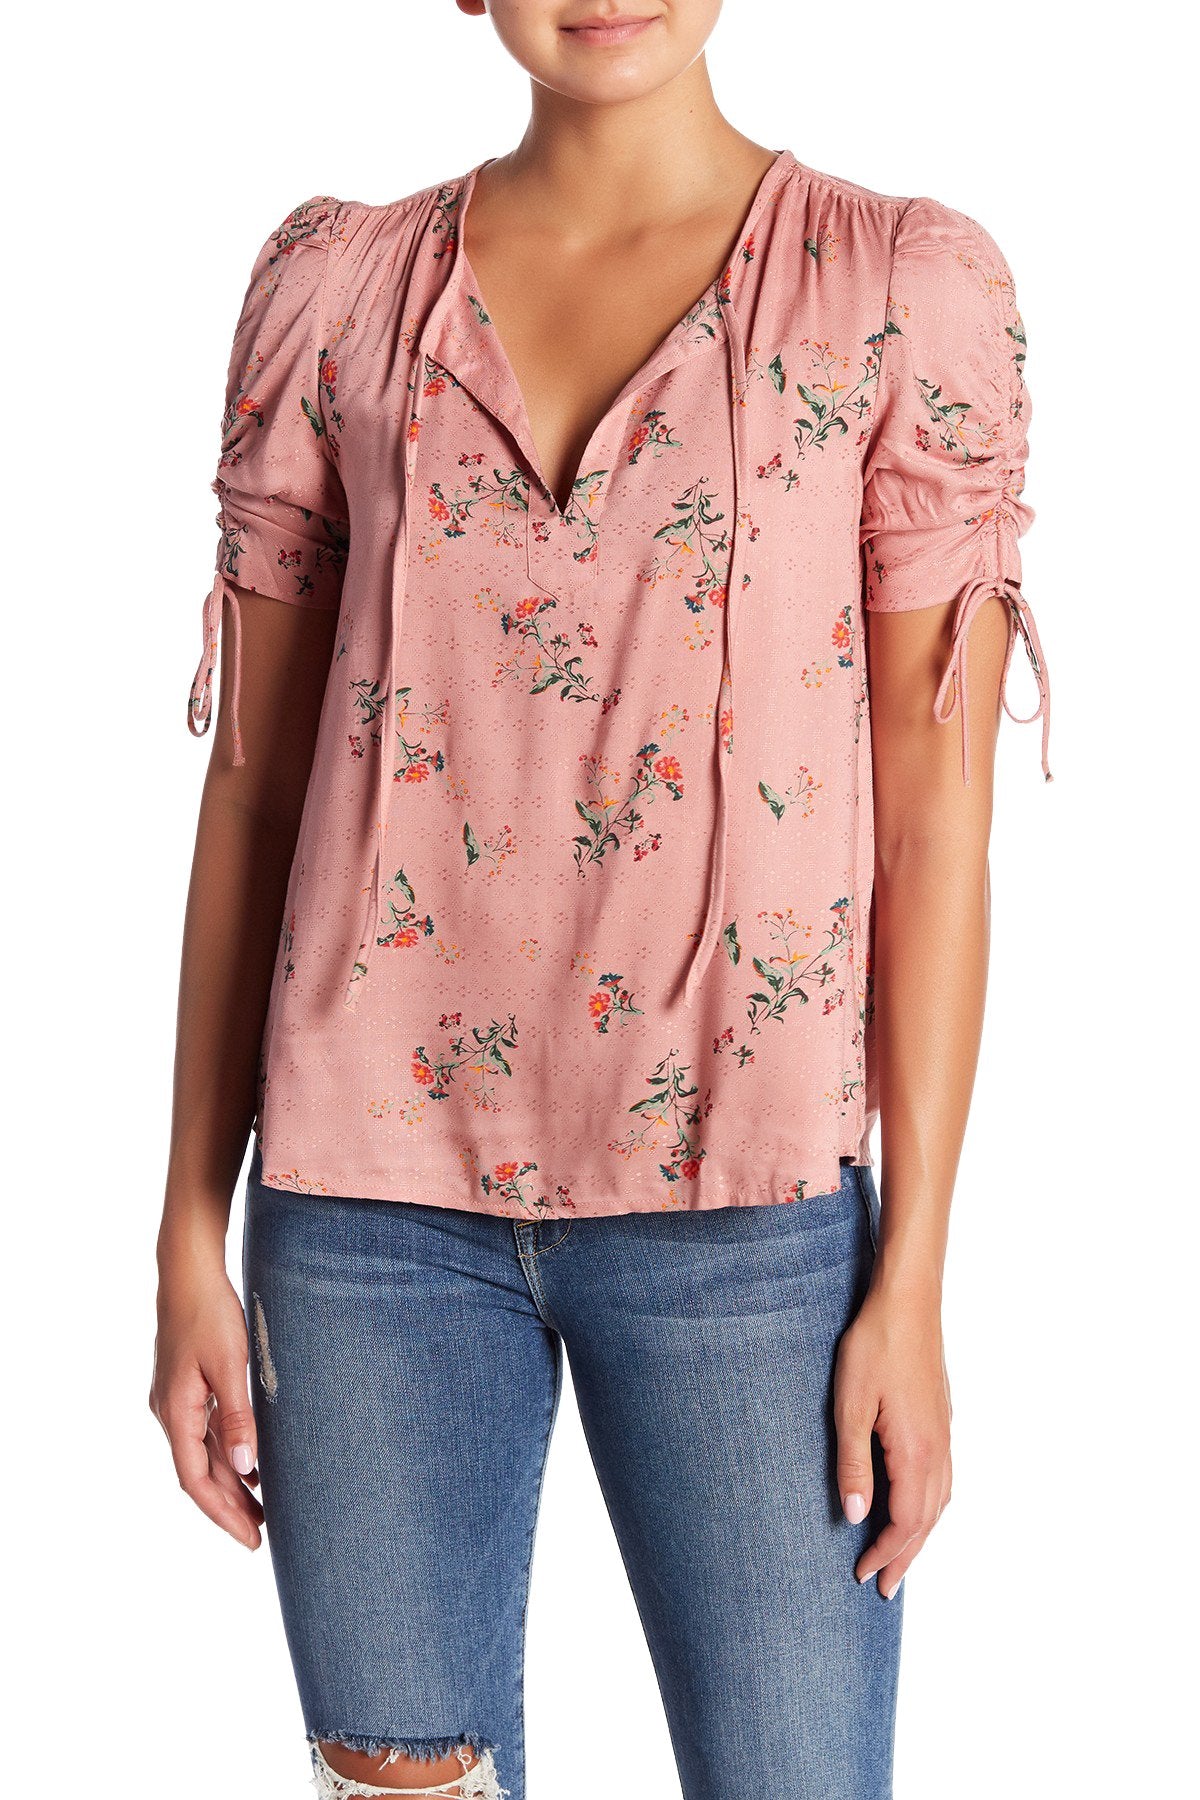 Lucky Brand Pink Puff-Sleeve Printed Top